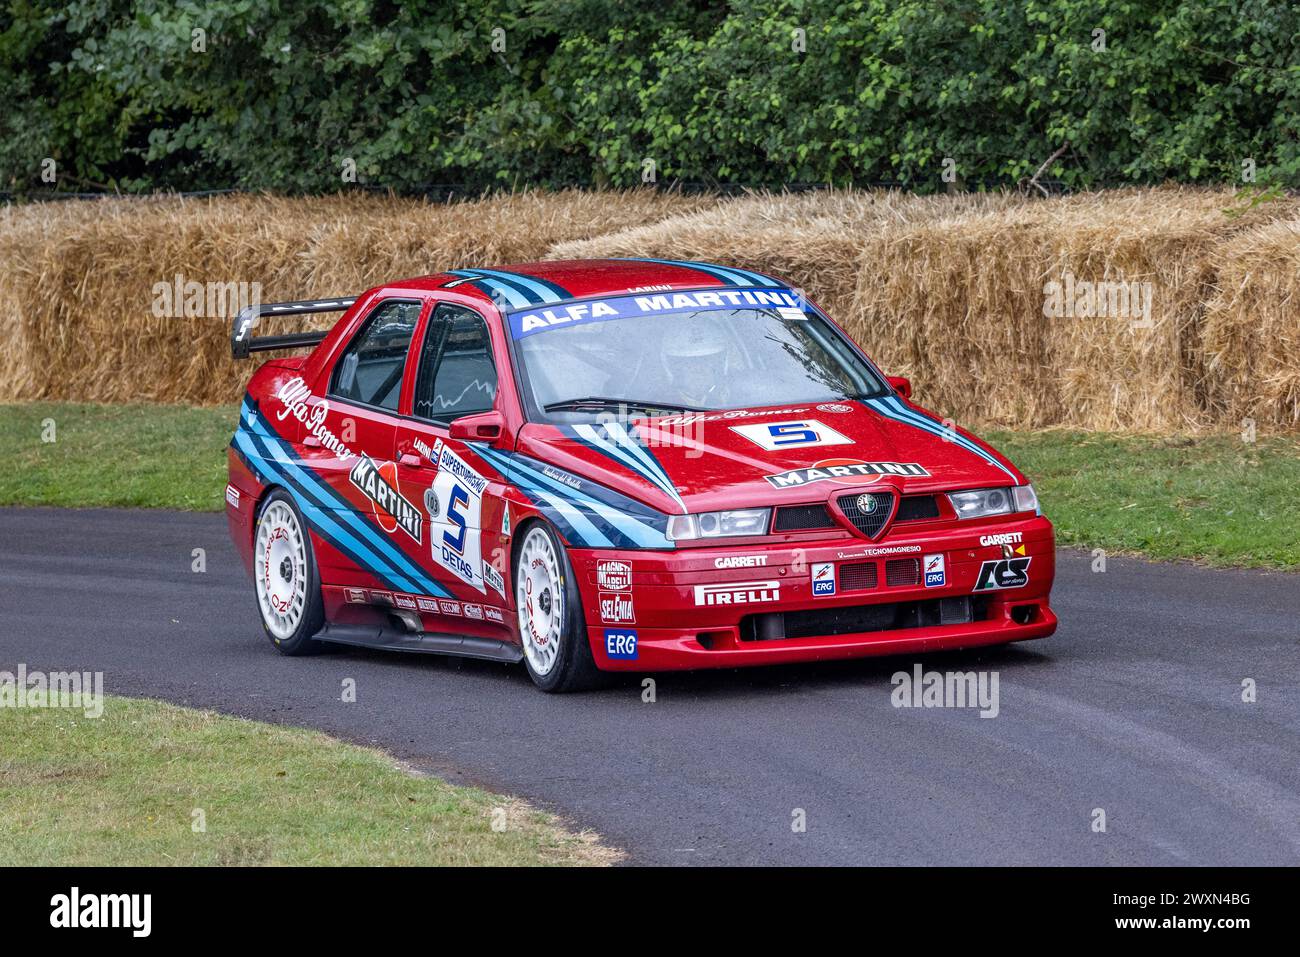 Kuno Schar in the 1992 Alfa Romeo 155 GTA S1 touring car racer at the 2023 Goodwood Festival of Speed, Sussex, UK Stock Photo